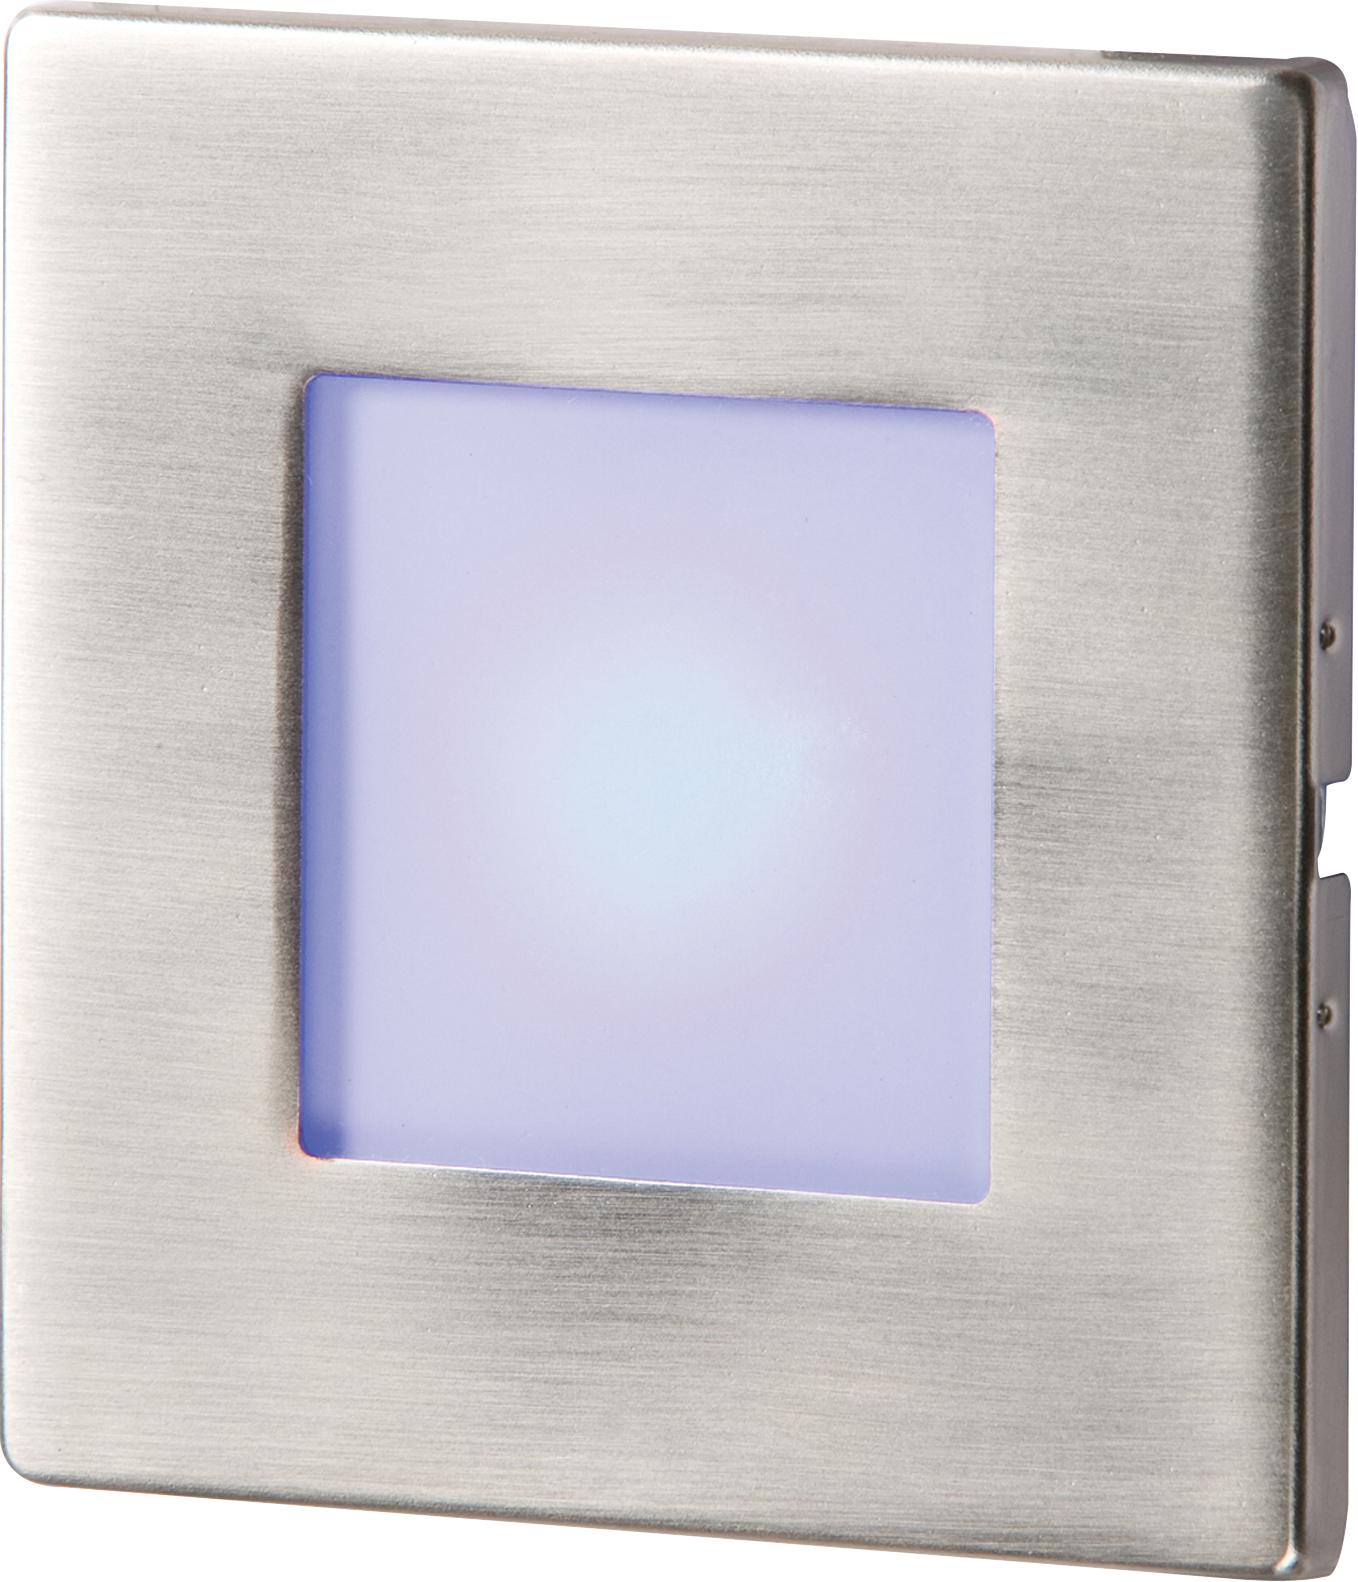 Stainless Steel Recessed LED Wall Light Single Blue - NH023B 